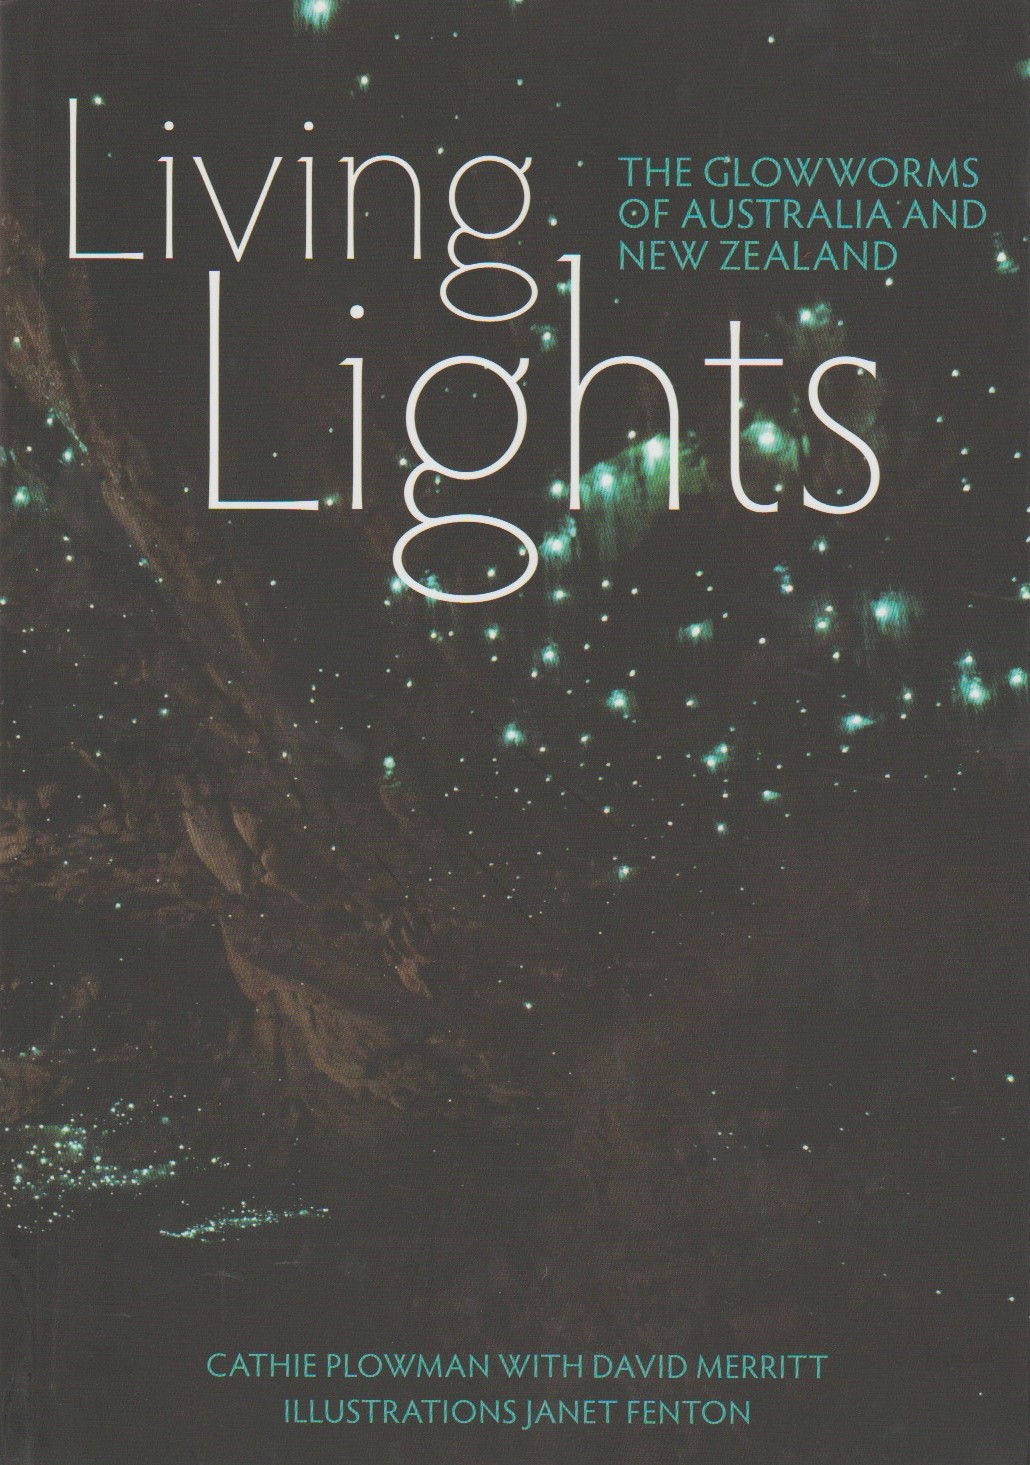 Living Lights - the Glowworms of Australia and New Zealand